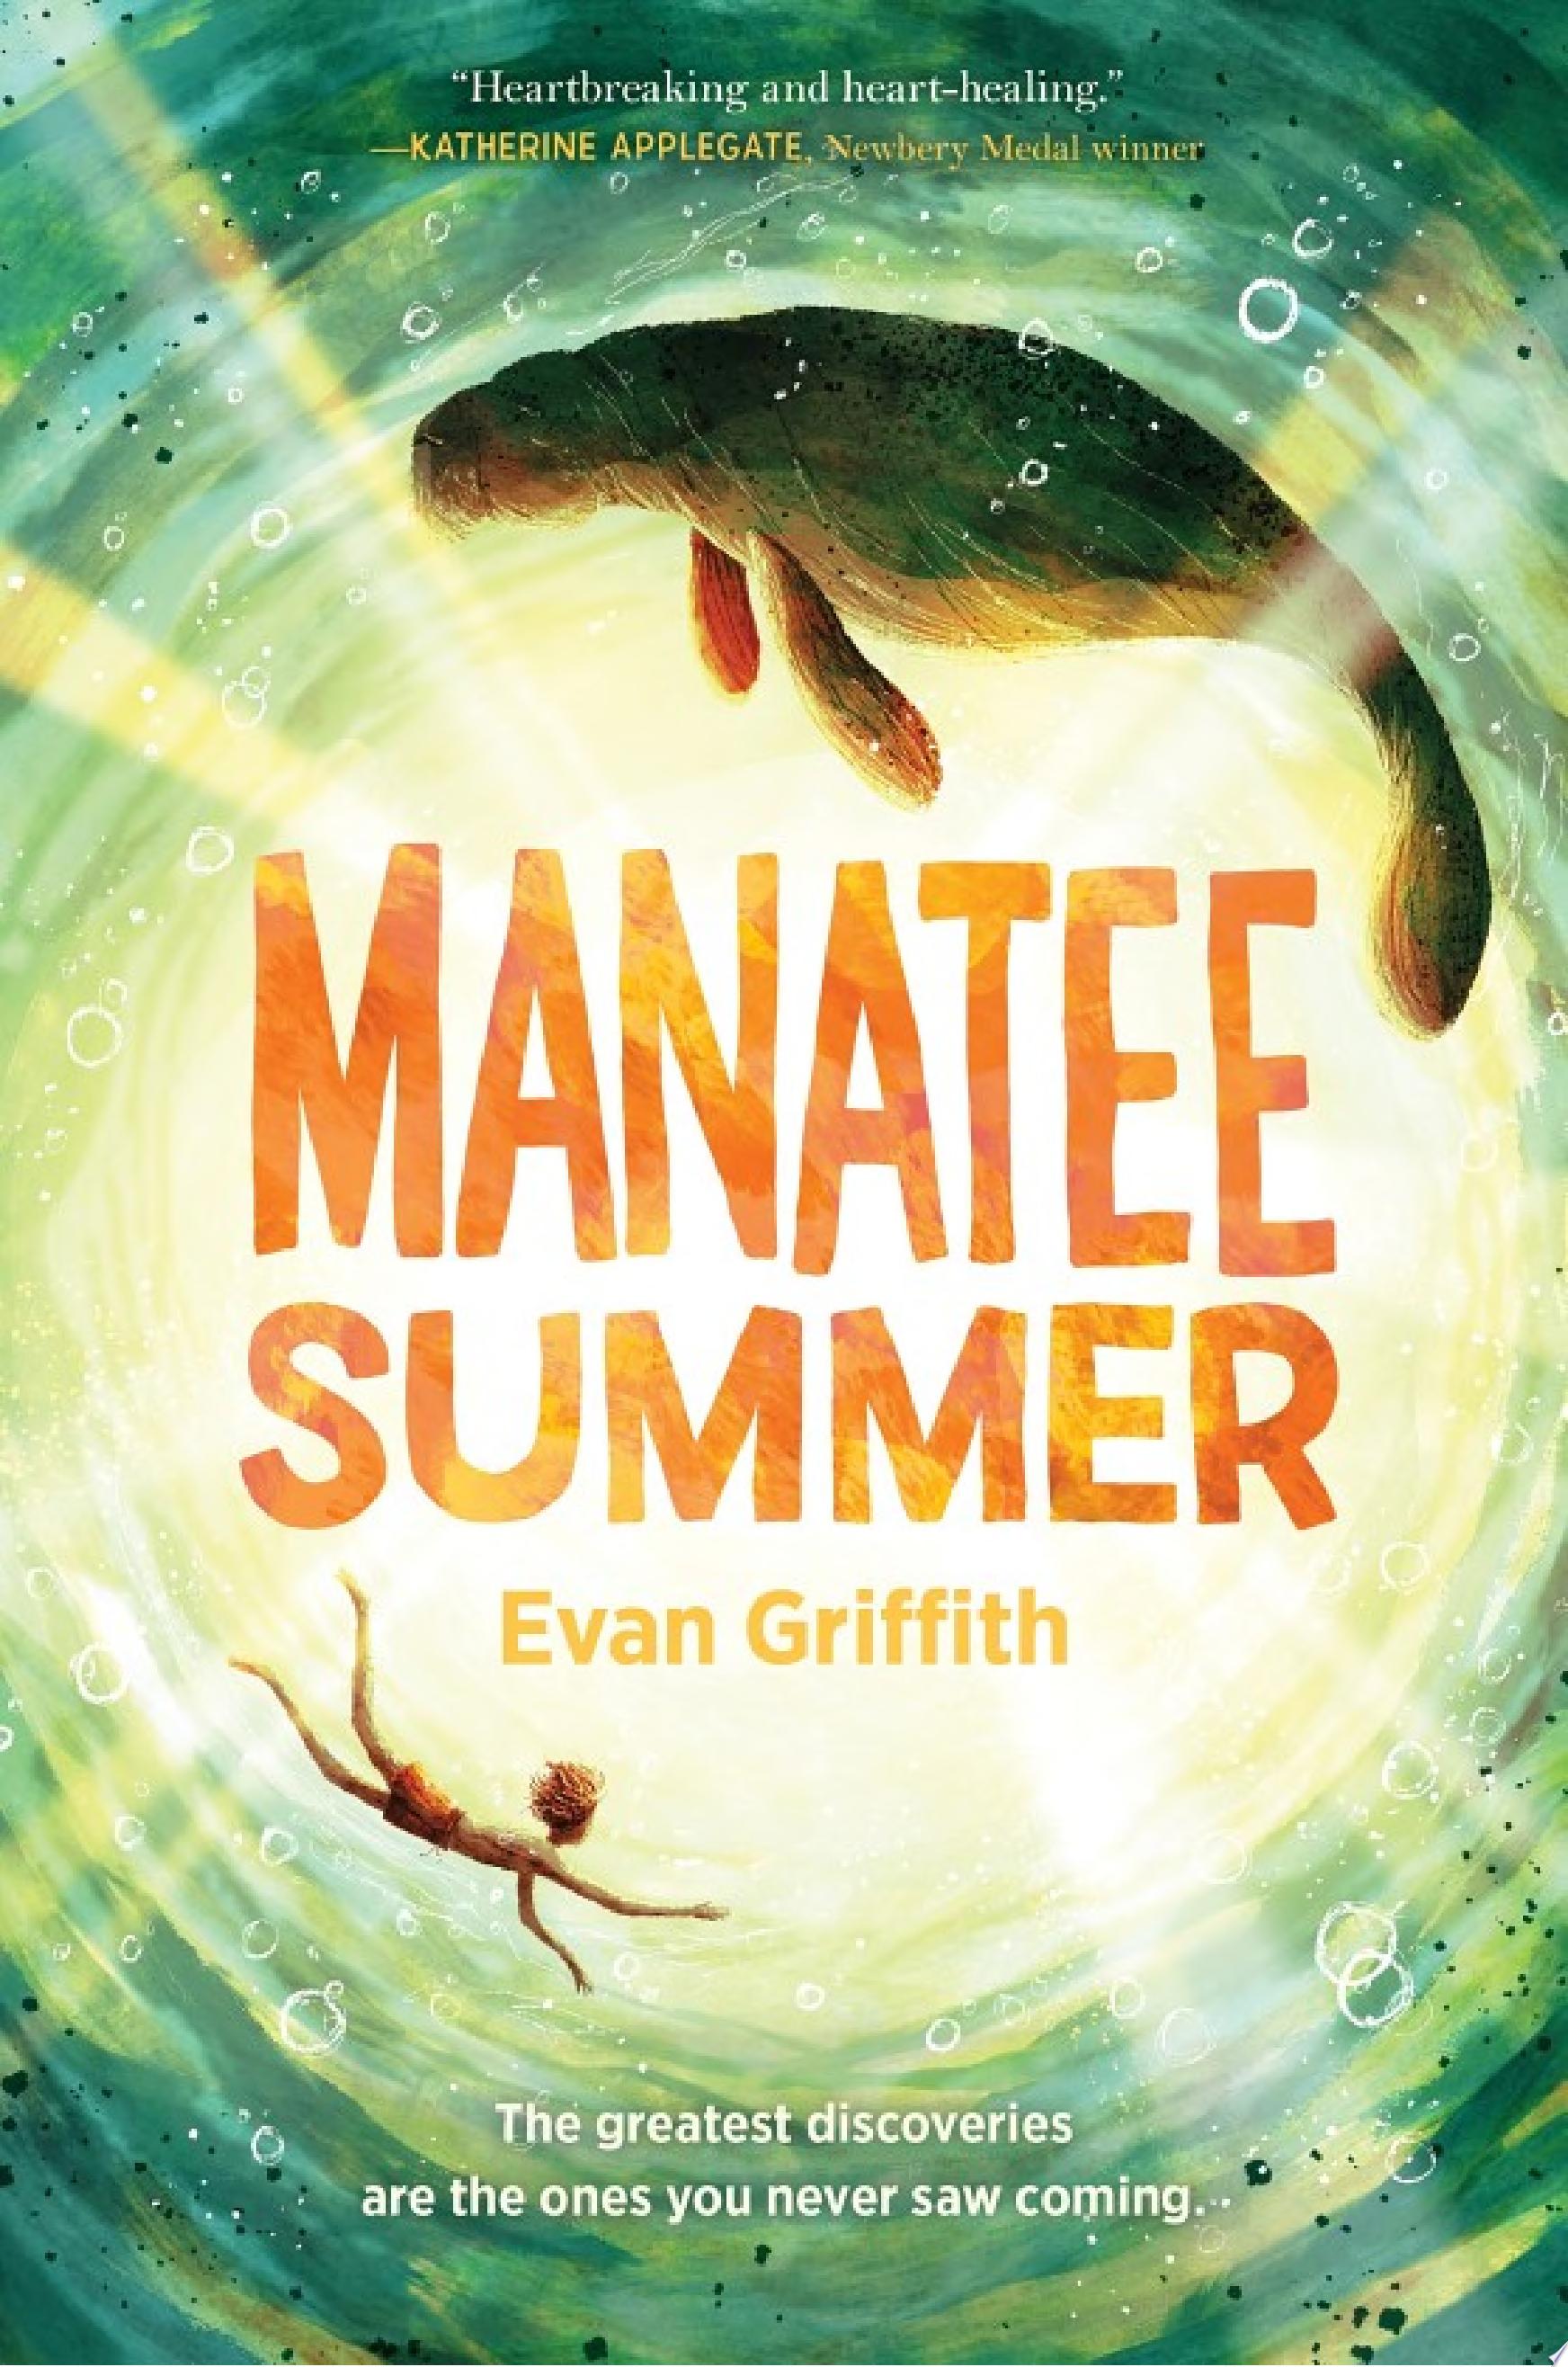 Image for "Manatee Summer"